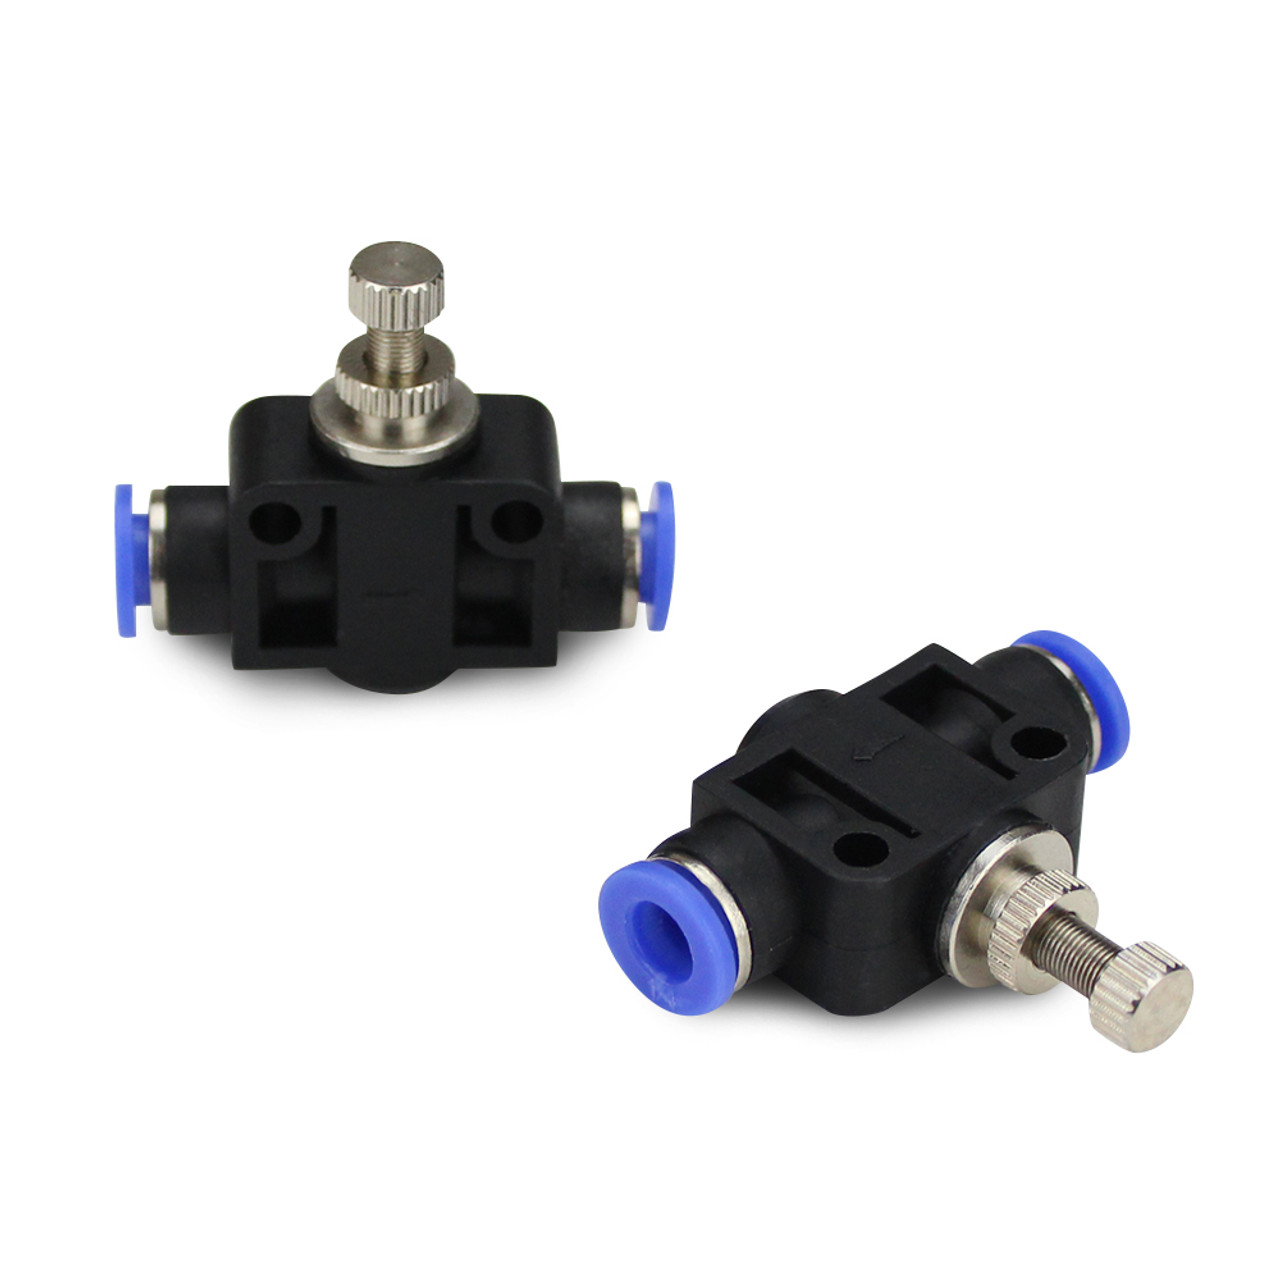 Inline Air Flow Speed Control Valve Push Connect Fitting - 2 Pack